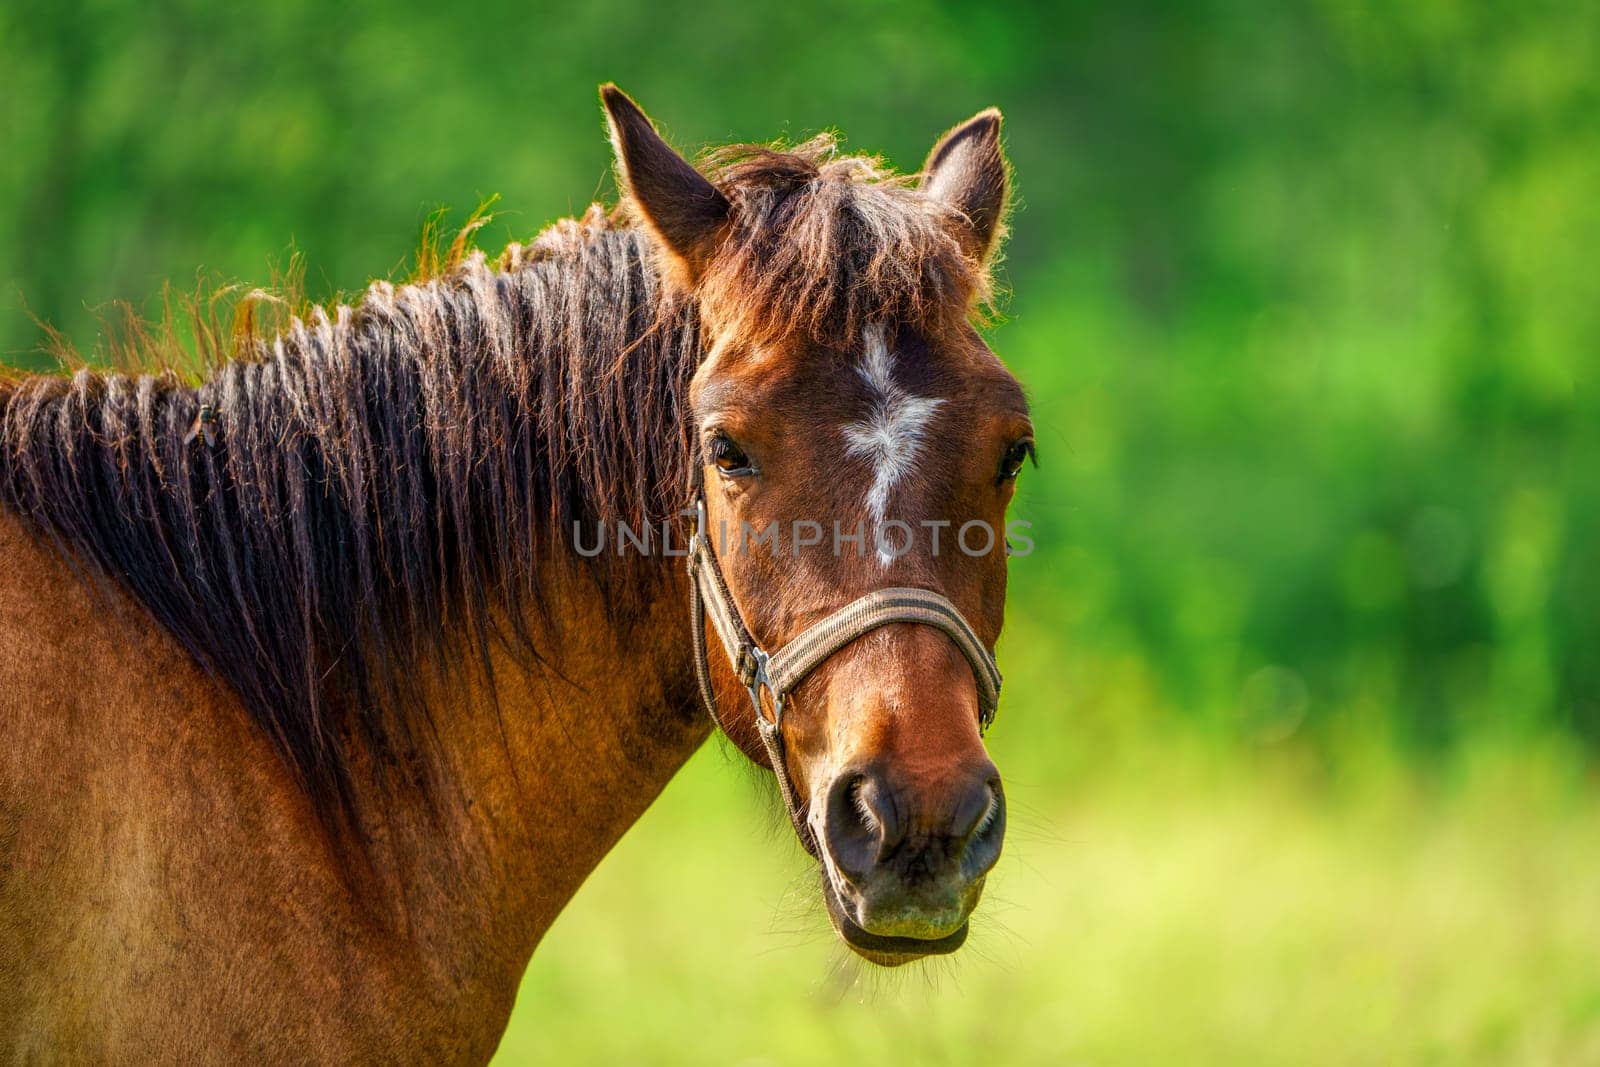 Powerful and elegant, a brown horse against a vibrant green field, creating a tranquil and captivating scene. Capturing the essence of grace and power, this close-up portrait features a stunning brown horse. horse close up face